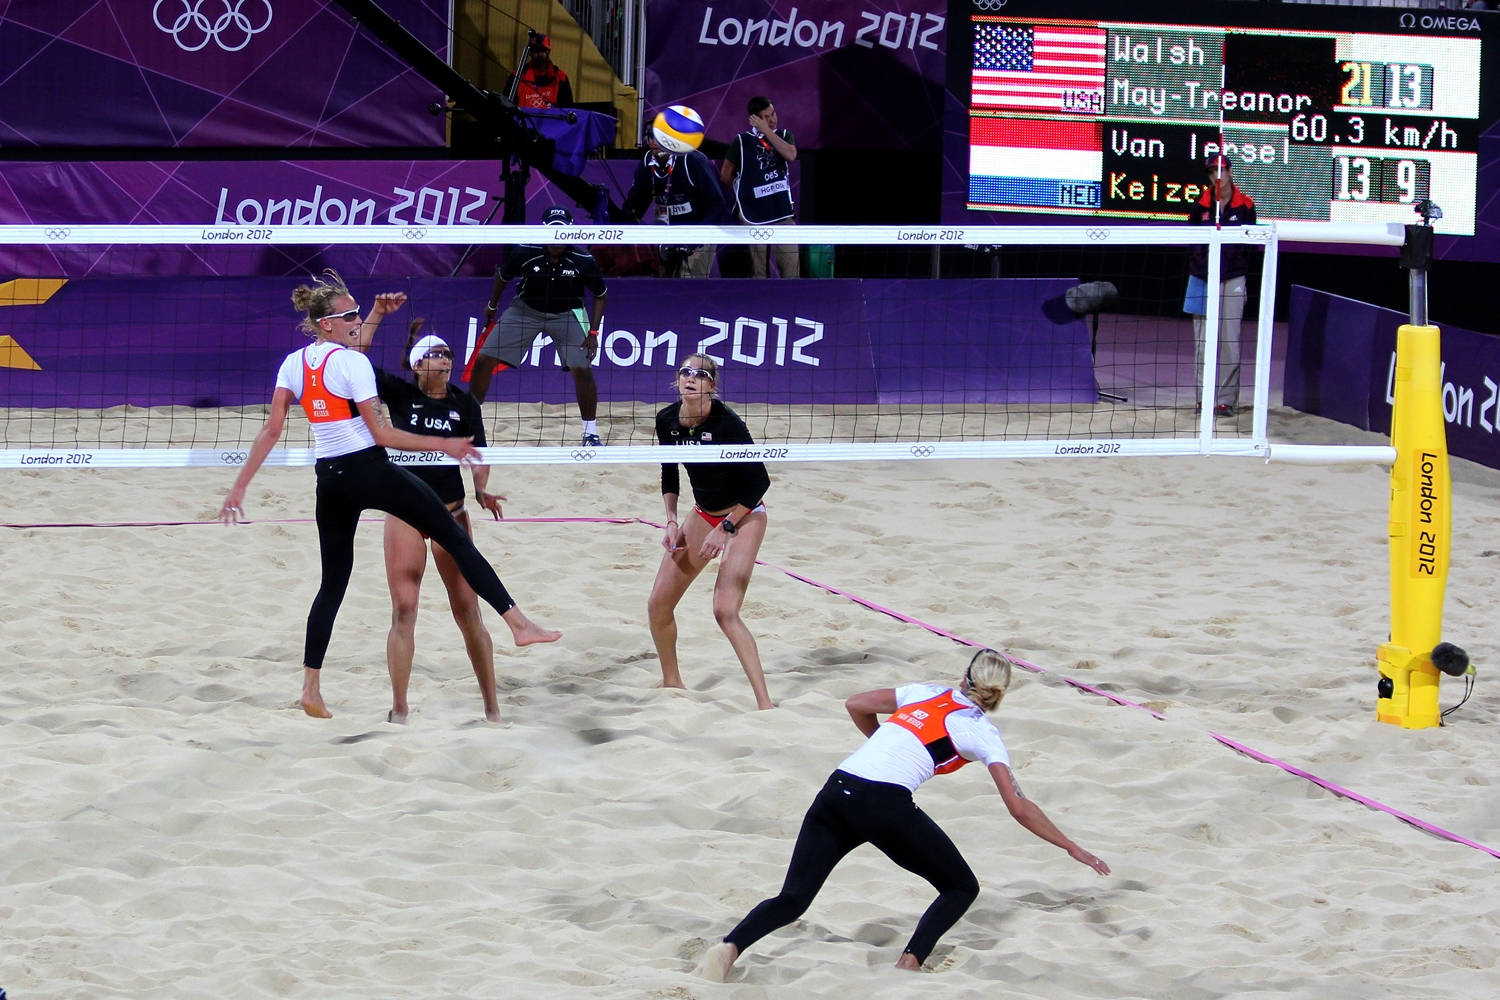 2012 Olympic Games Beach Volleyball Wallpaper